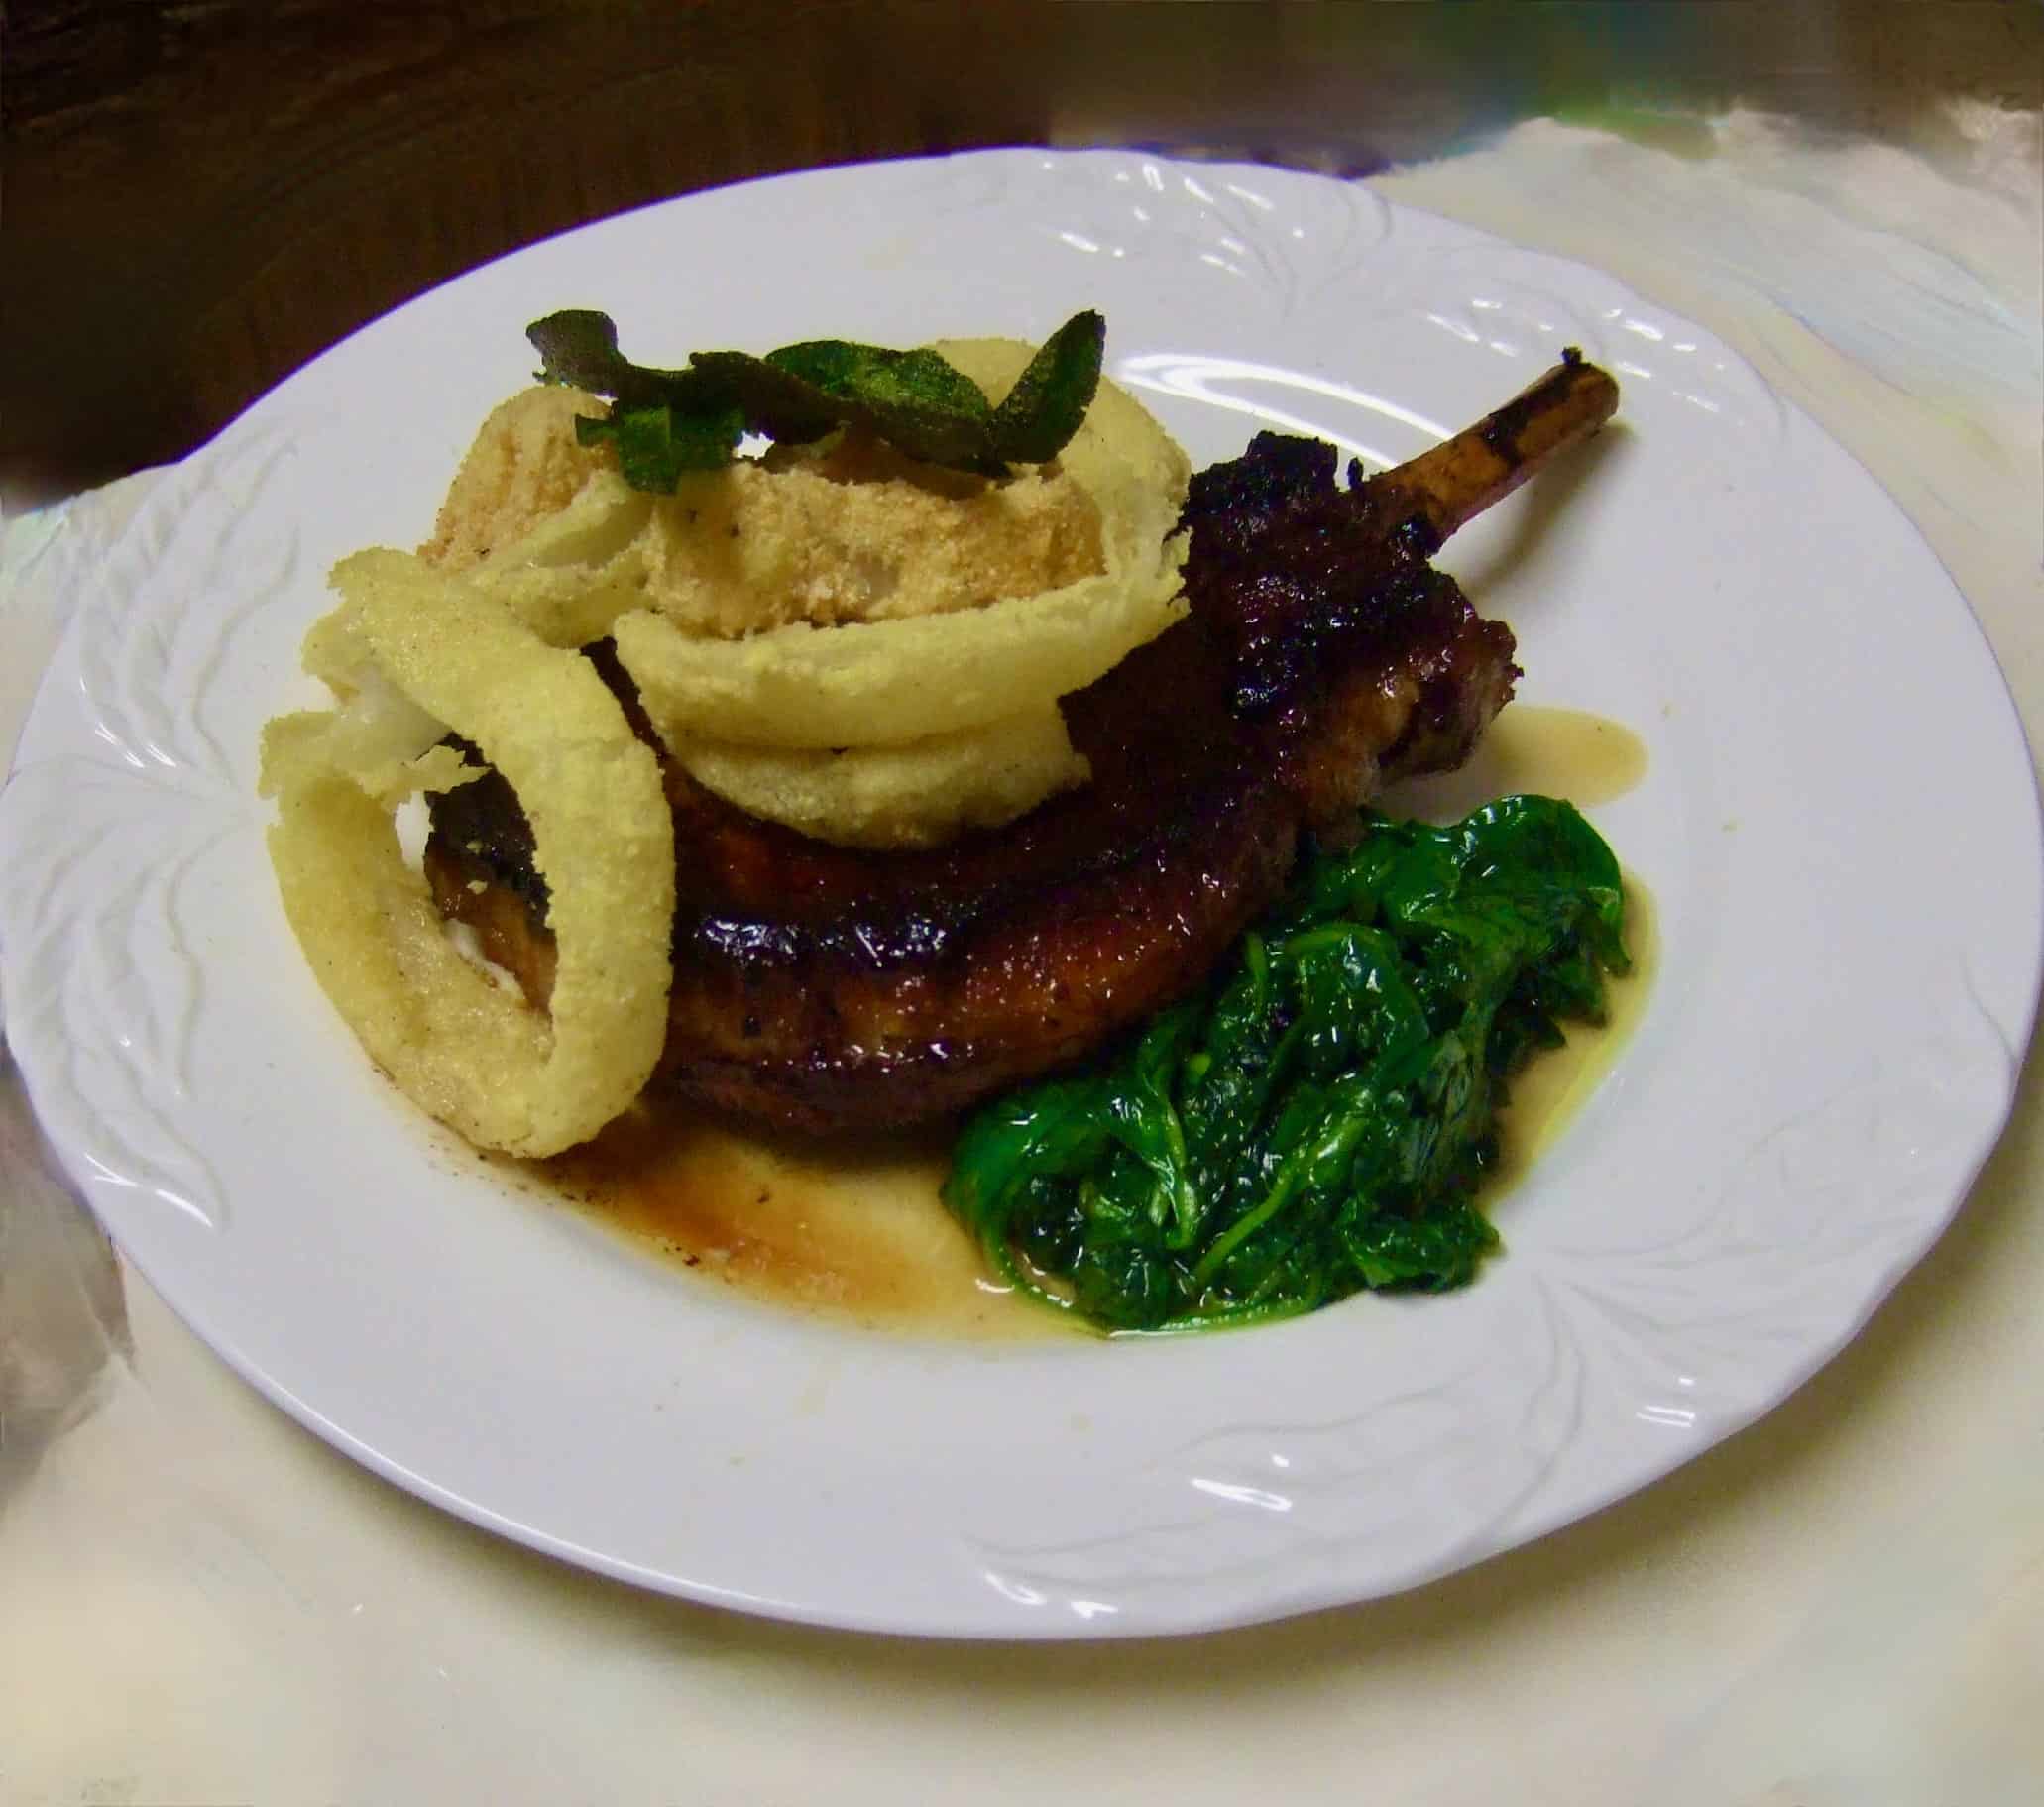 Jamie Oliver’s Maple Glazed Pork Chops with Cornmeal Crusted Onion Rings